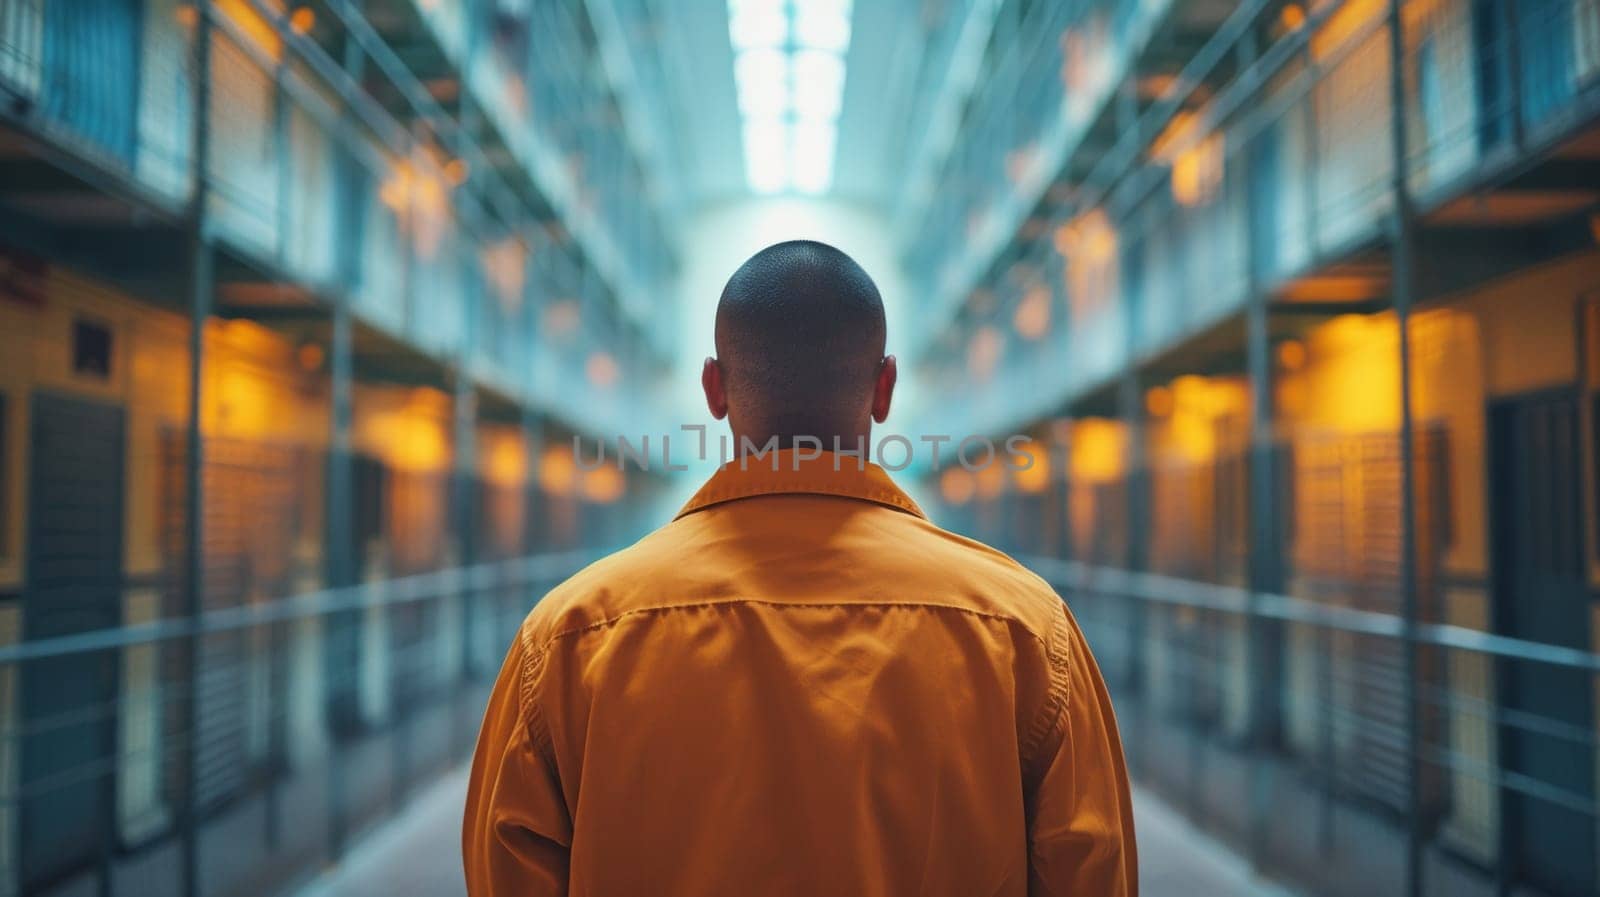 A man in orange jacket looking at camera from inside a jail cell